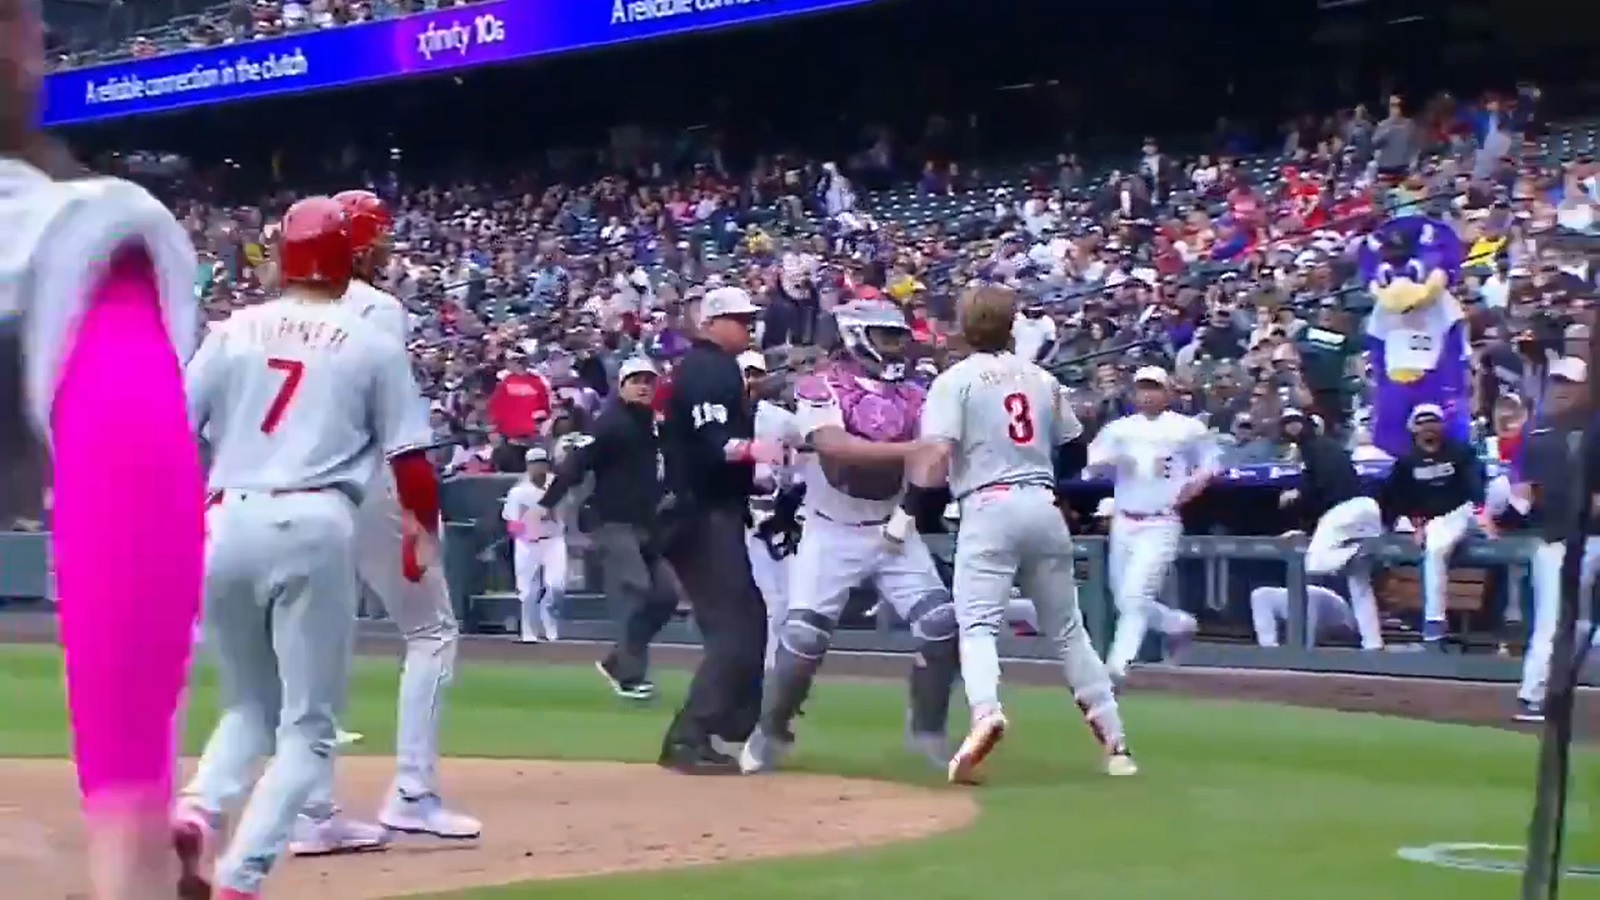 Video Bryce Harper Tries To Fight Rockies Pitcher Over Apparent Taunt